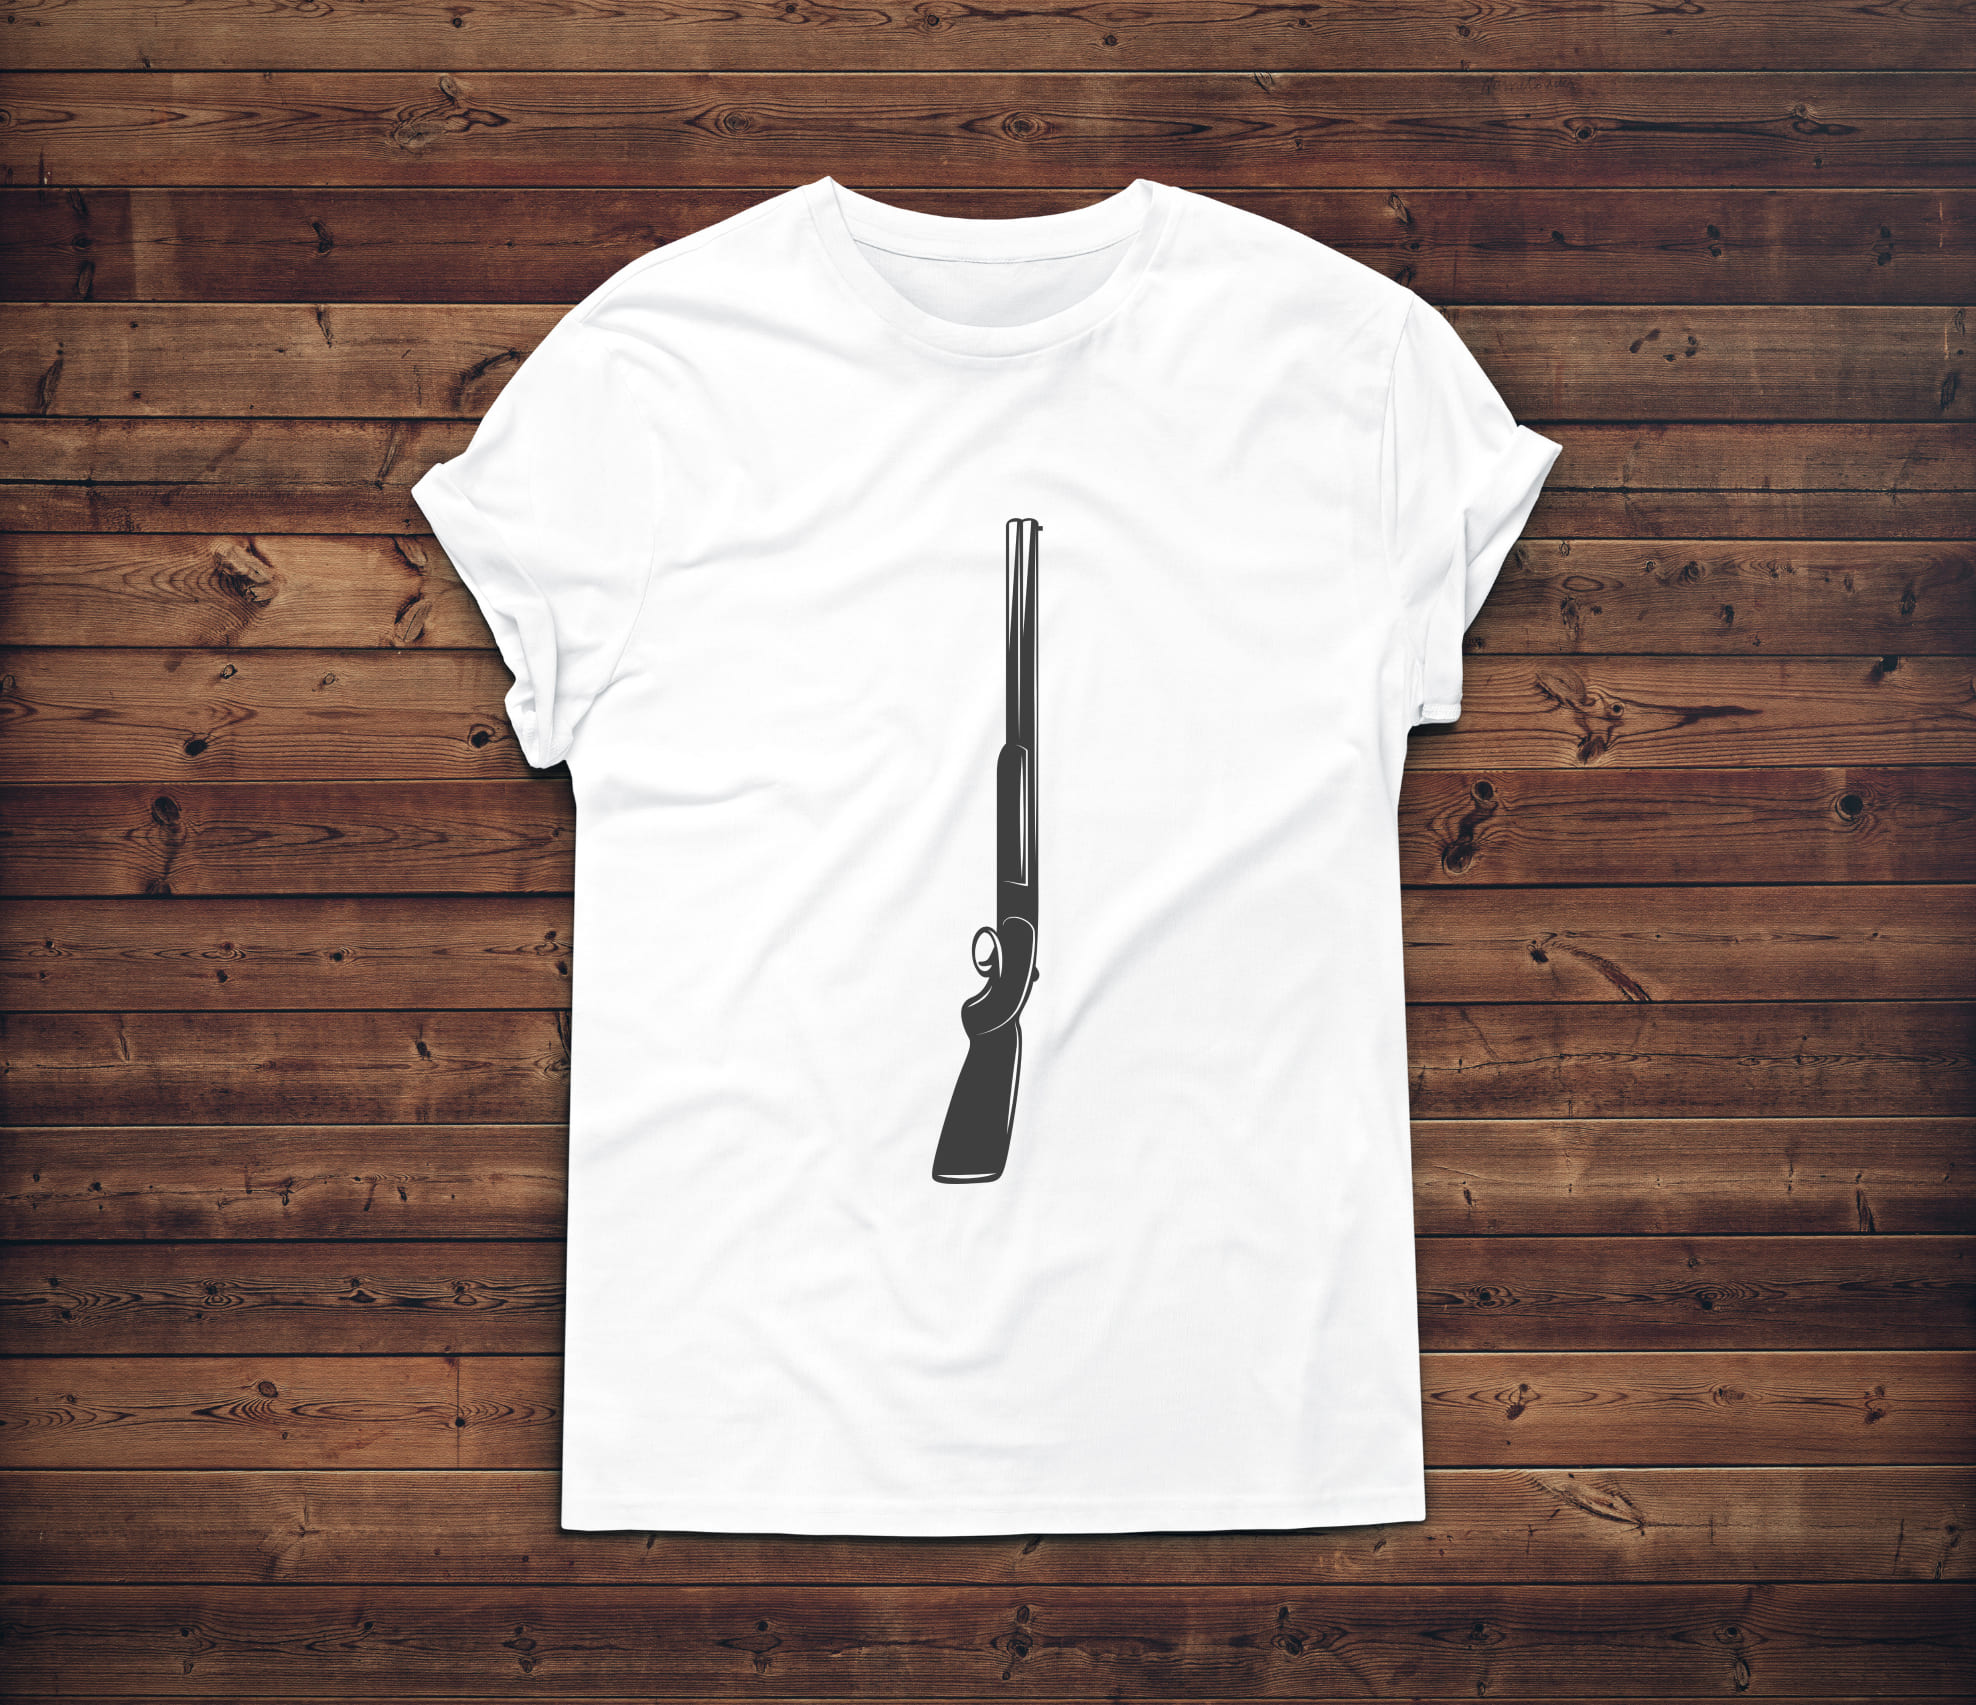 Image of a white t-shirt with an enchanting print of a silhouette of a gun.